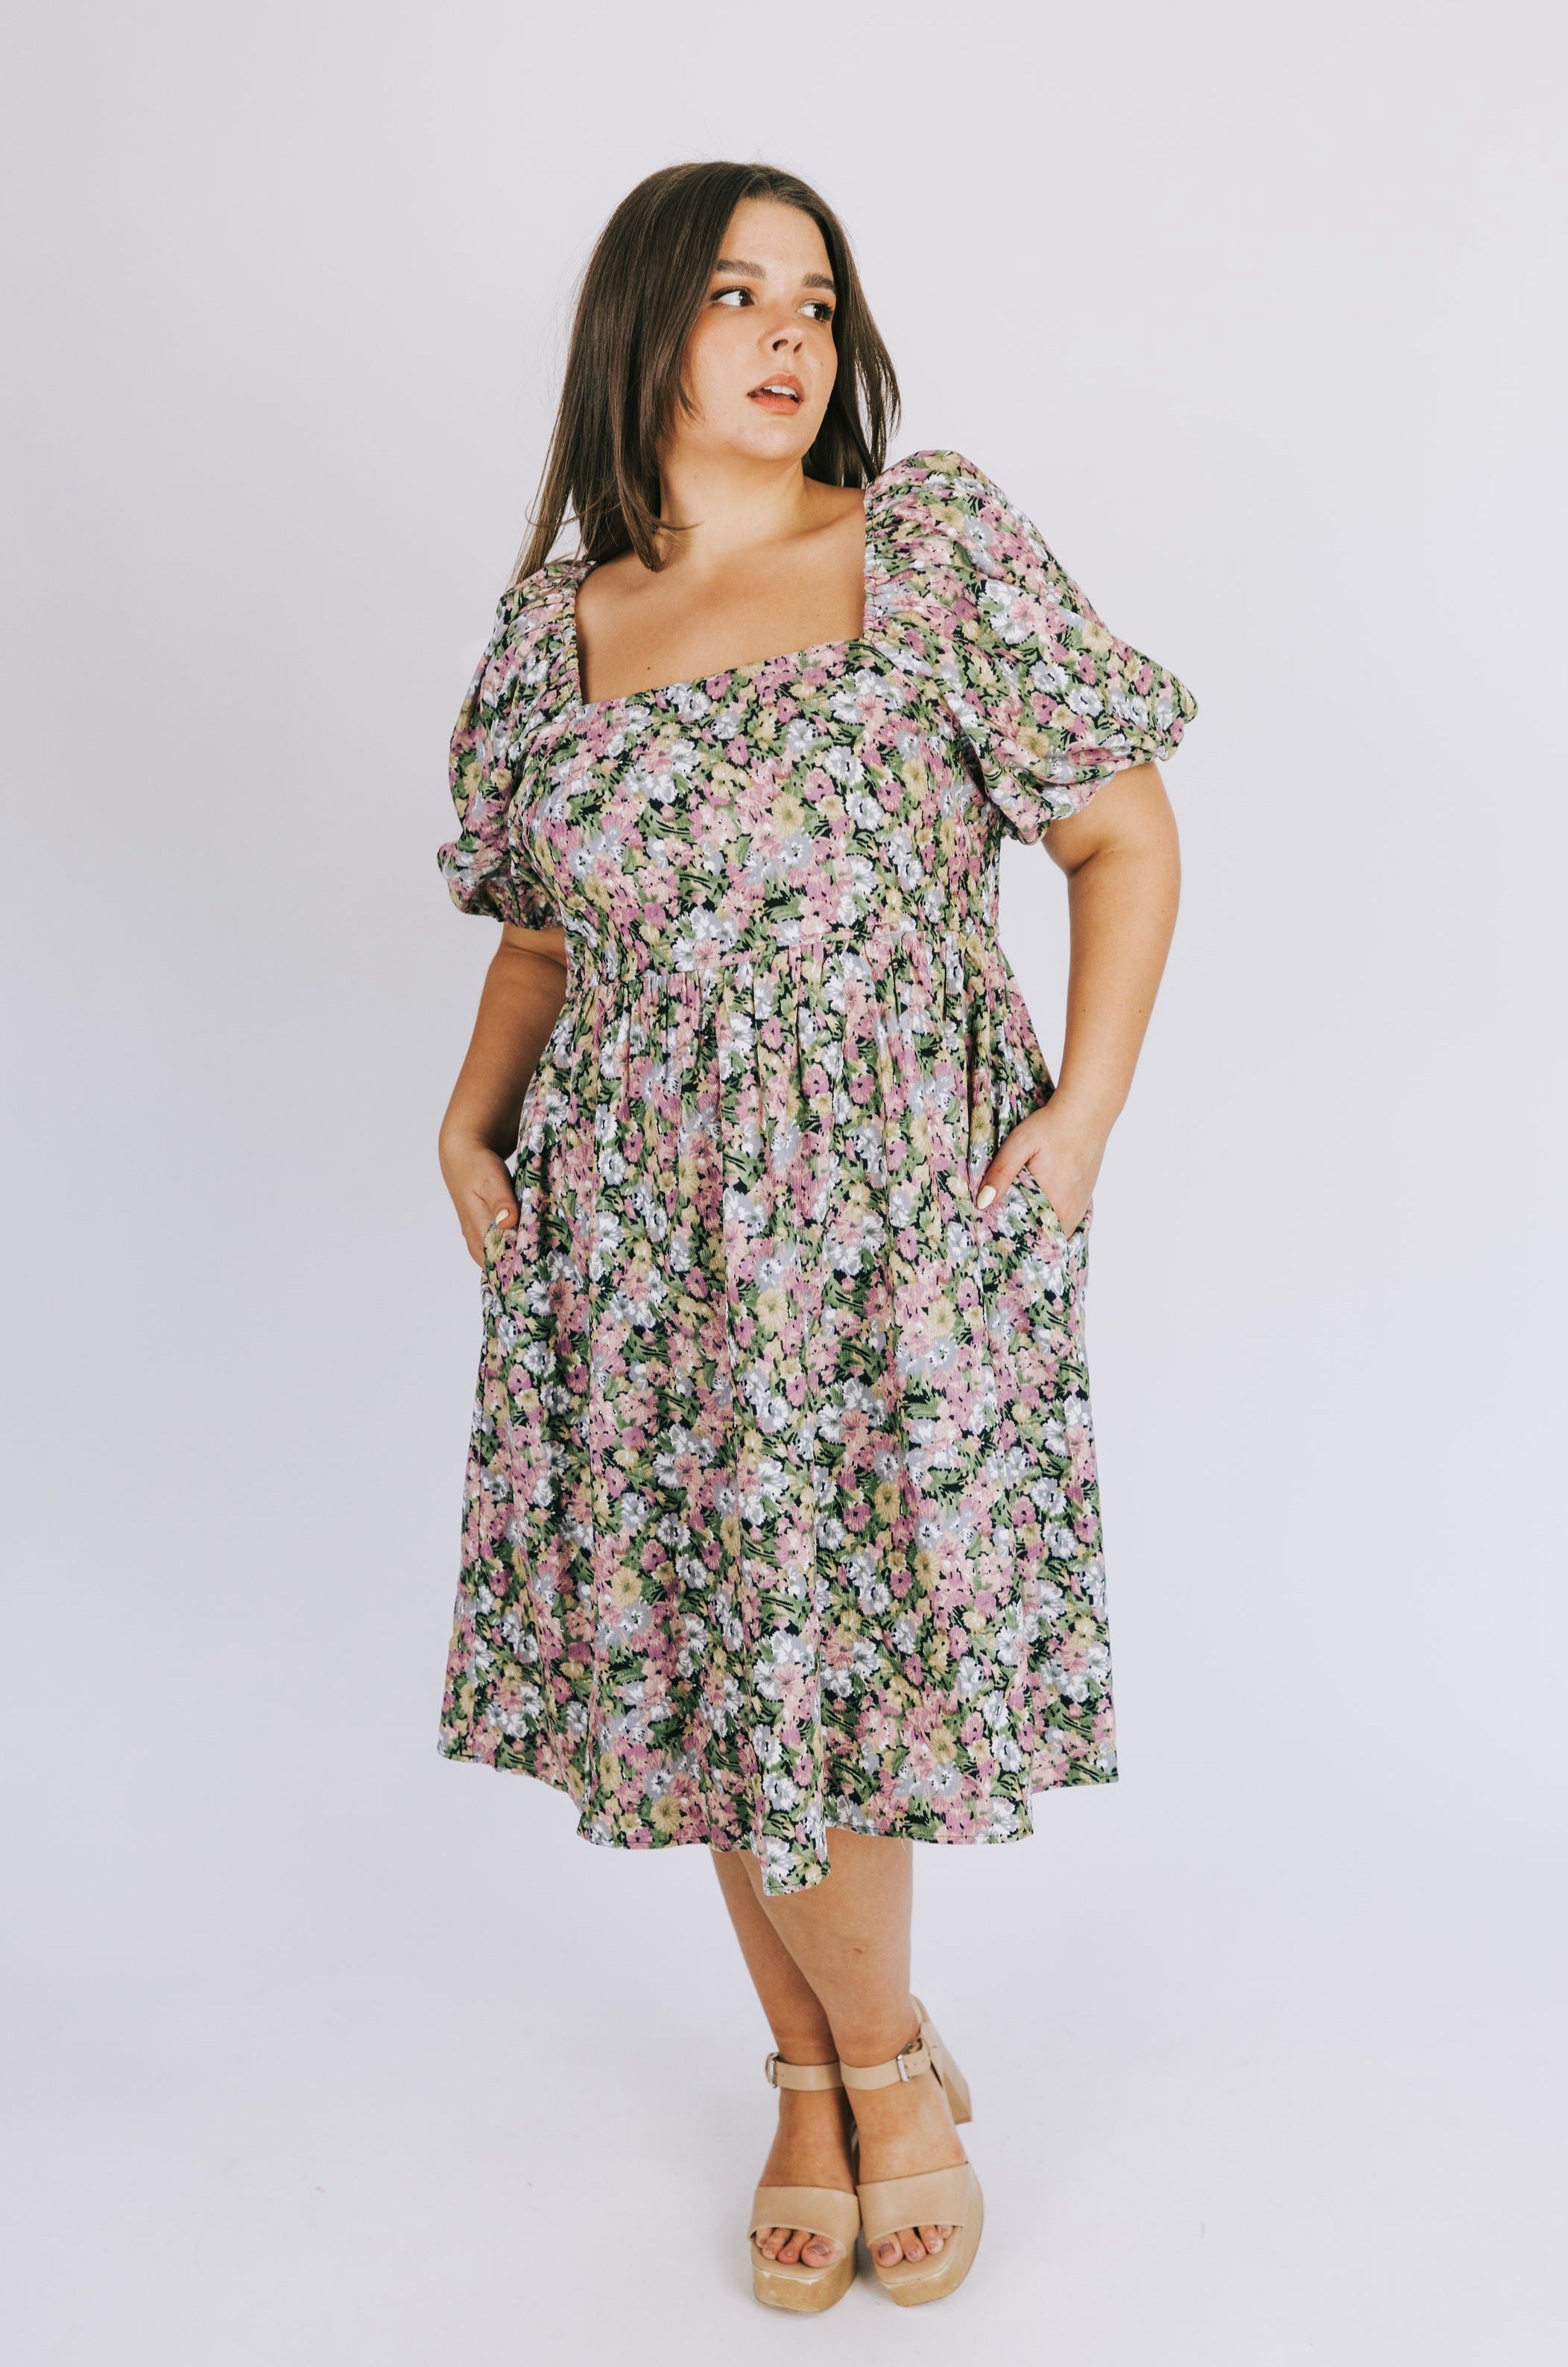 PLUS SIZE - Love Like This Dress